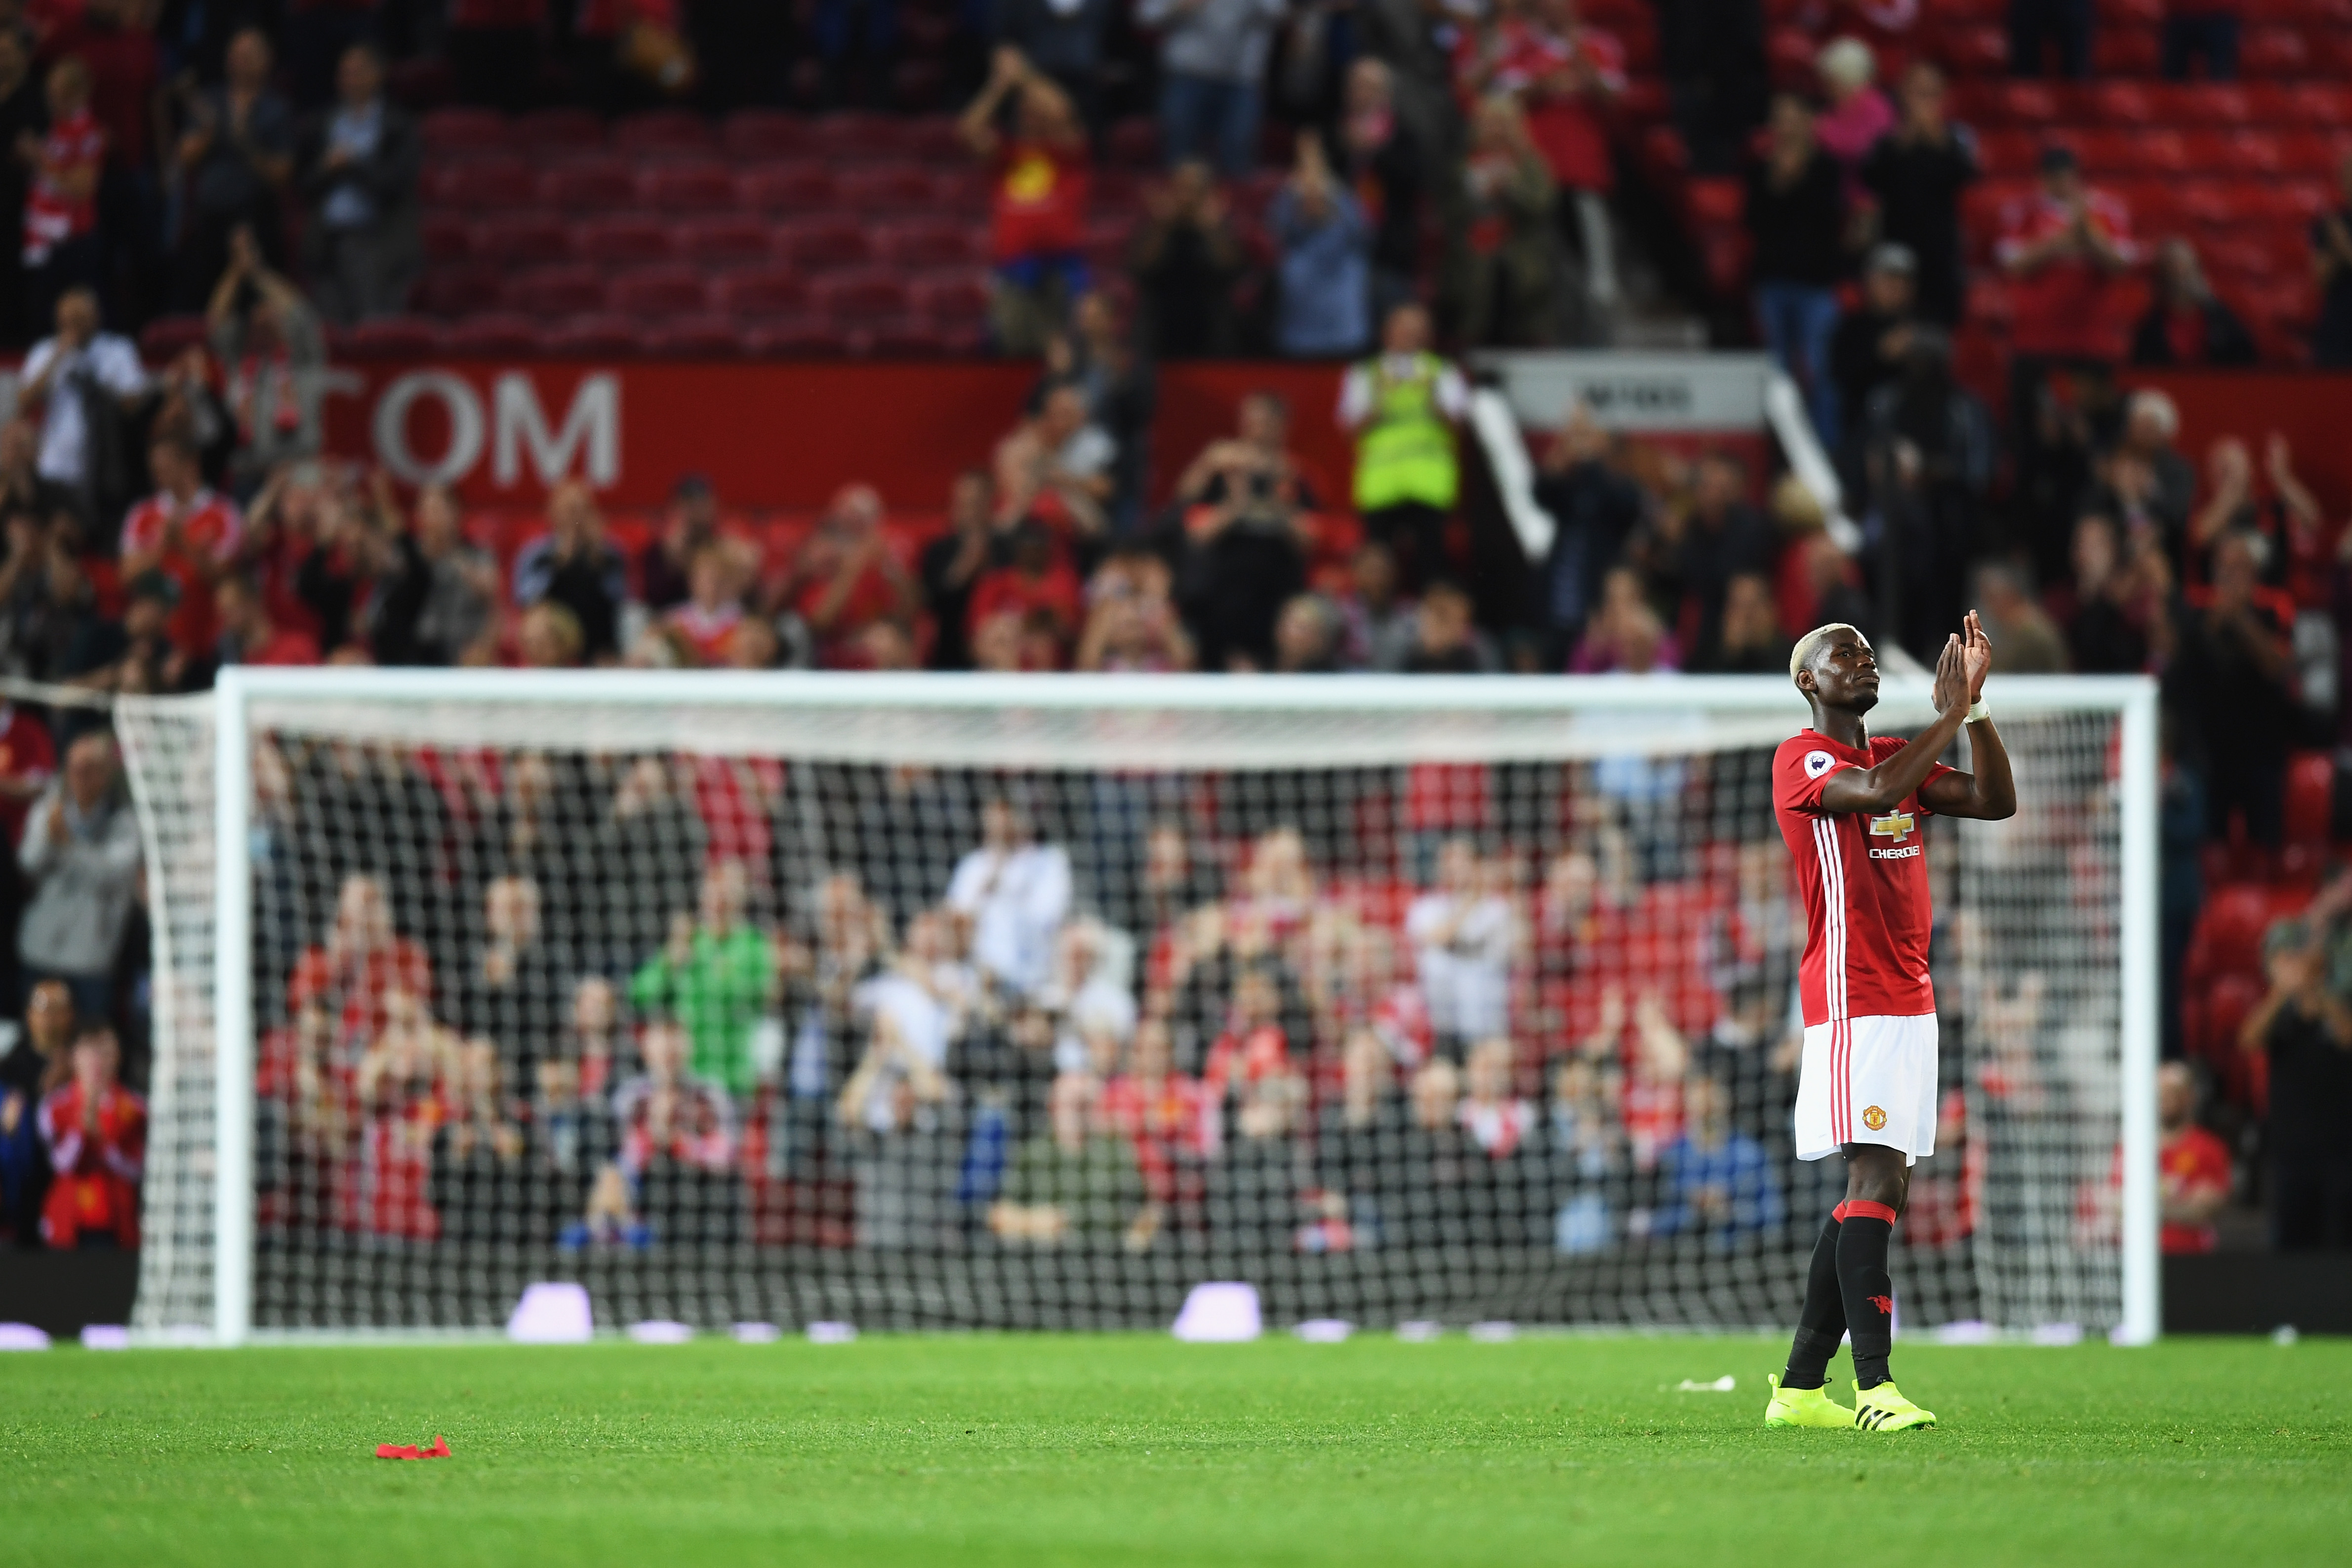 MANCHESTER, ENGLAND - AUGUST 19:  Paul Pogba of Manchester United applauds the fans after the Premier League match between Manchester United and Southampton at Old Trafford on August 19, 2016 in Manchester, England.  (Photo by Michael Regan/Getty Images)